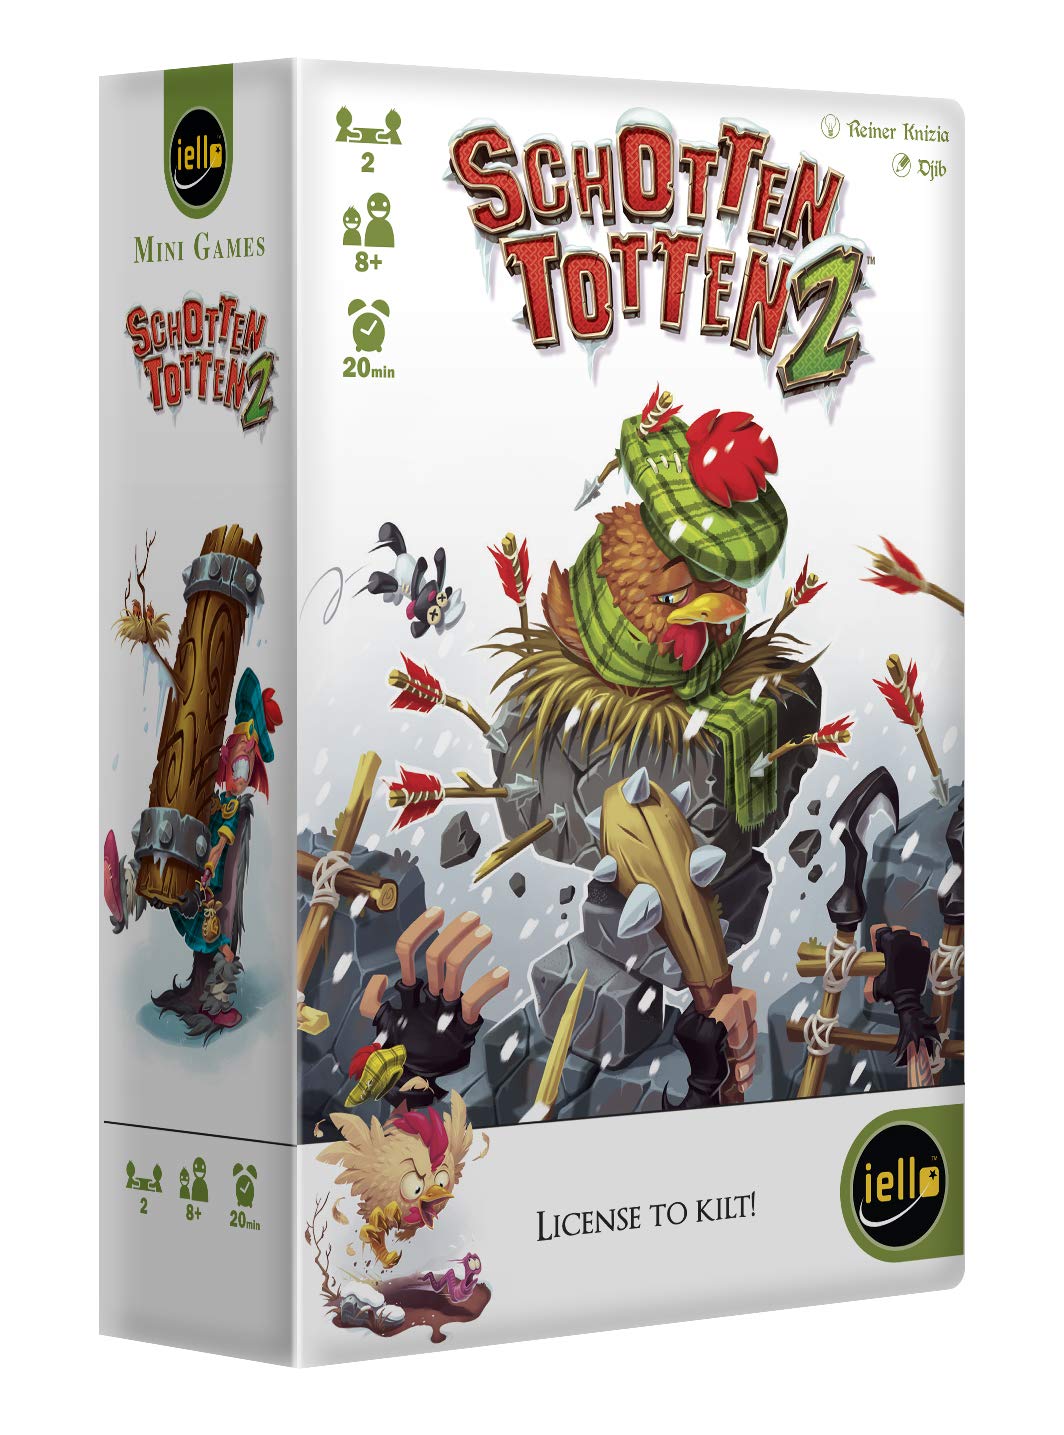 IELLO: Schotten Totten 2, Sequel, Strategy Card Game, Great for On The Go Gaming, 20 Minute Play Time, 2 Player, for Ages 8 and Up